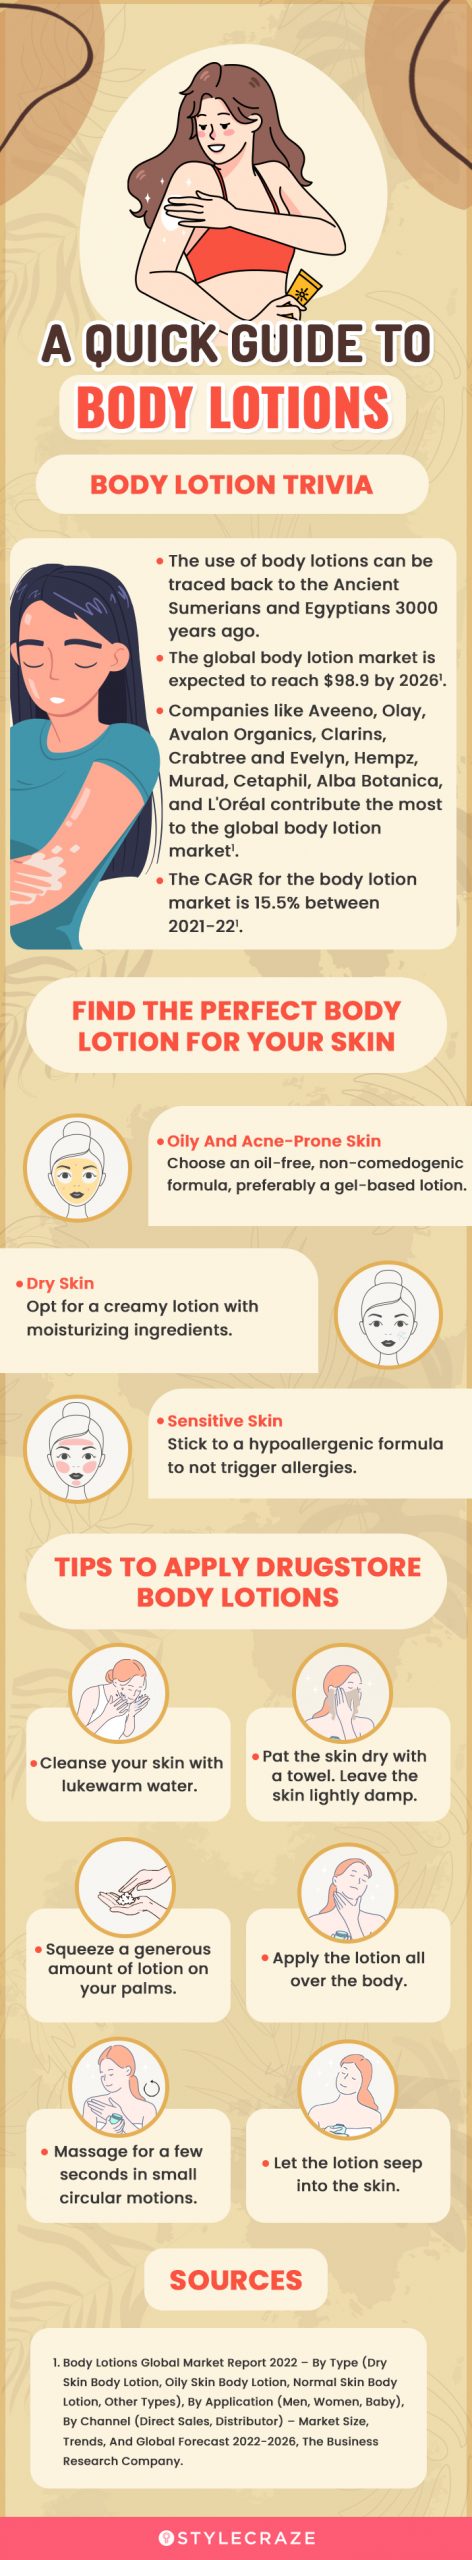 A Quick Guide To Body Lotions [infographic]